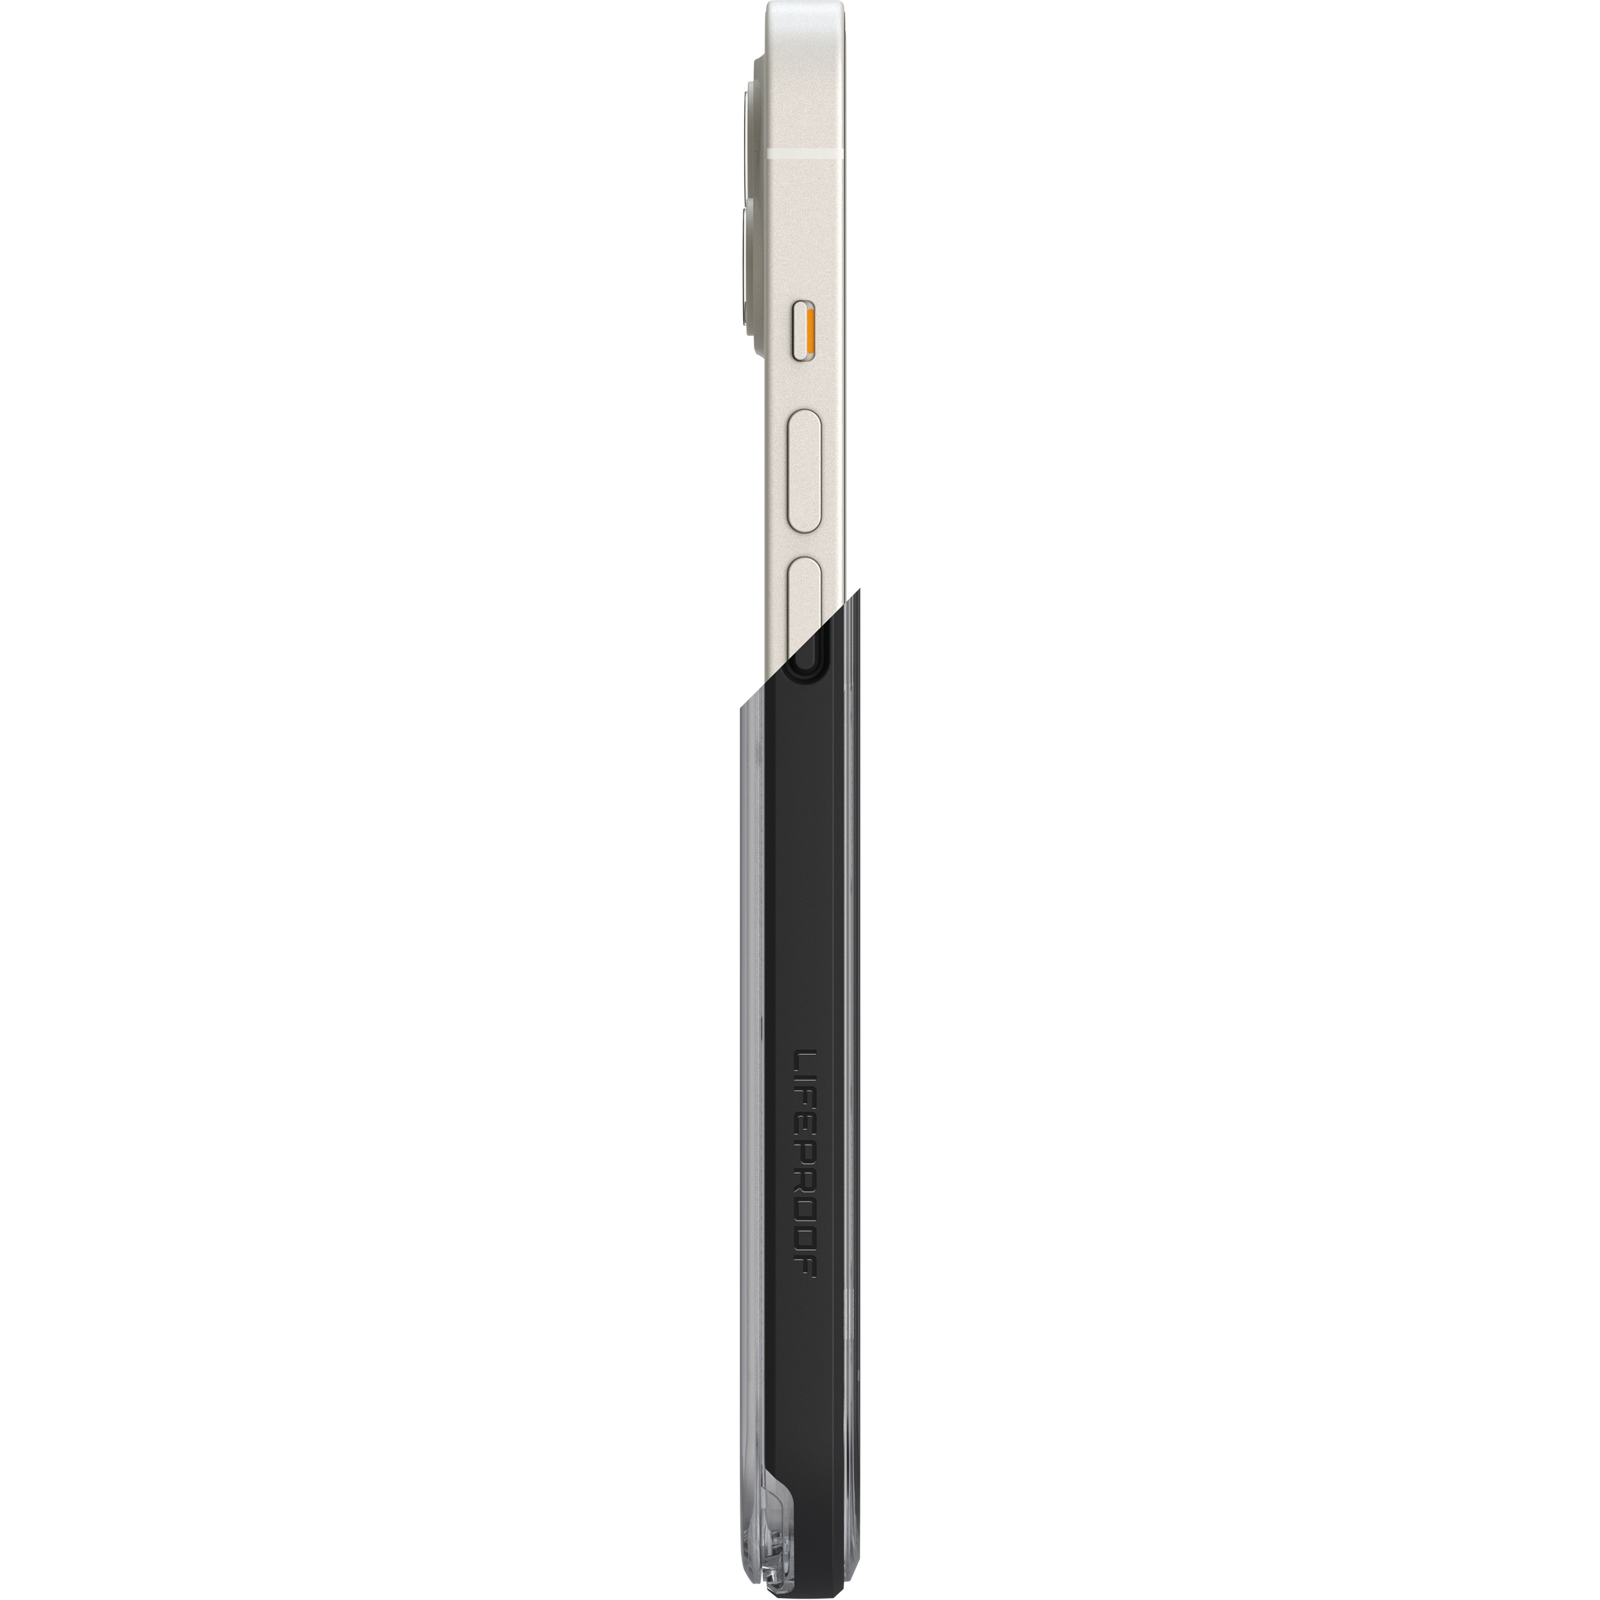 NËXT for MagSafe for iPhone 13 — the eco-friendly, ultra-thin, Apple  friendly clear case